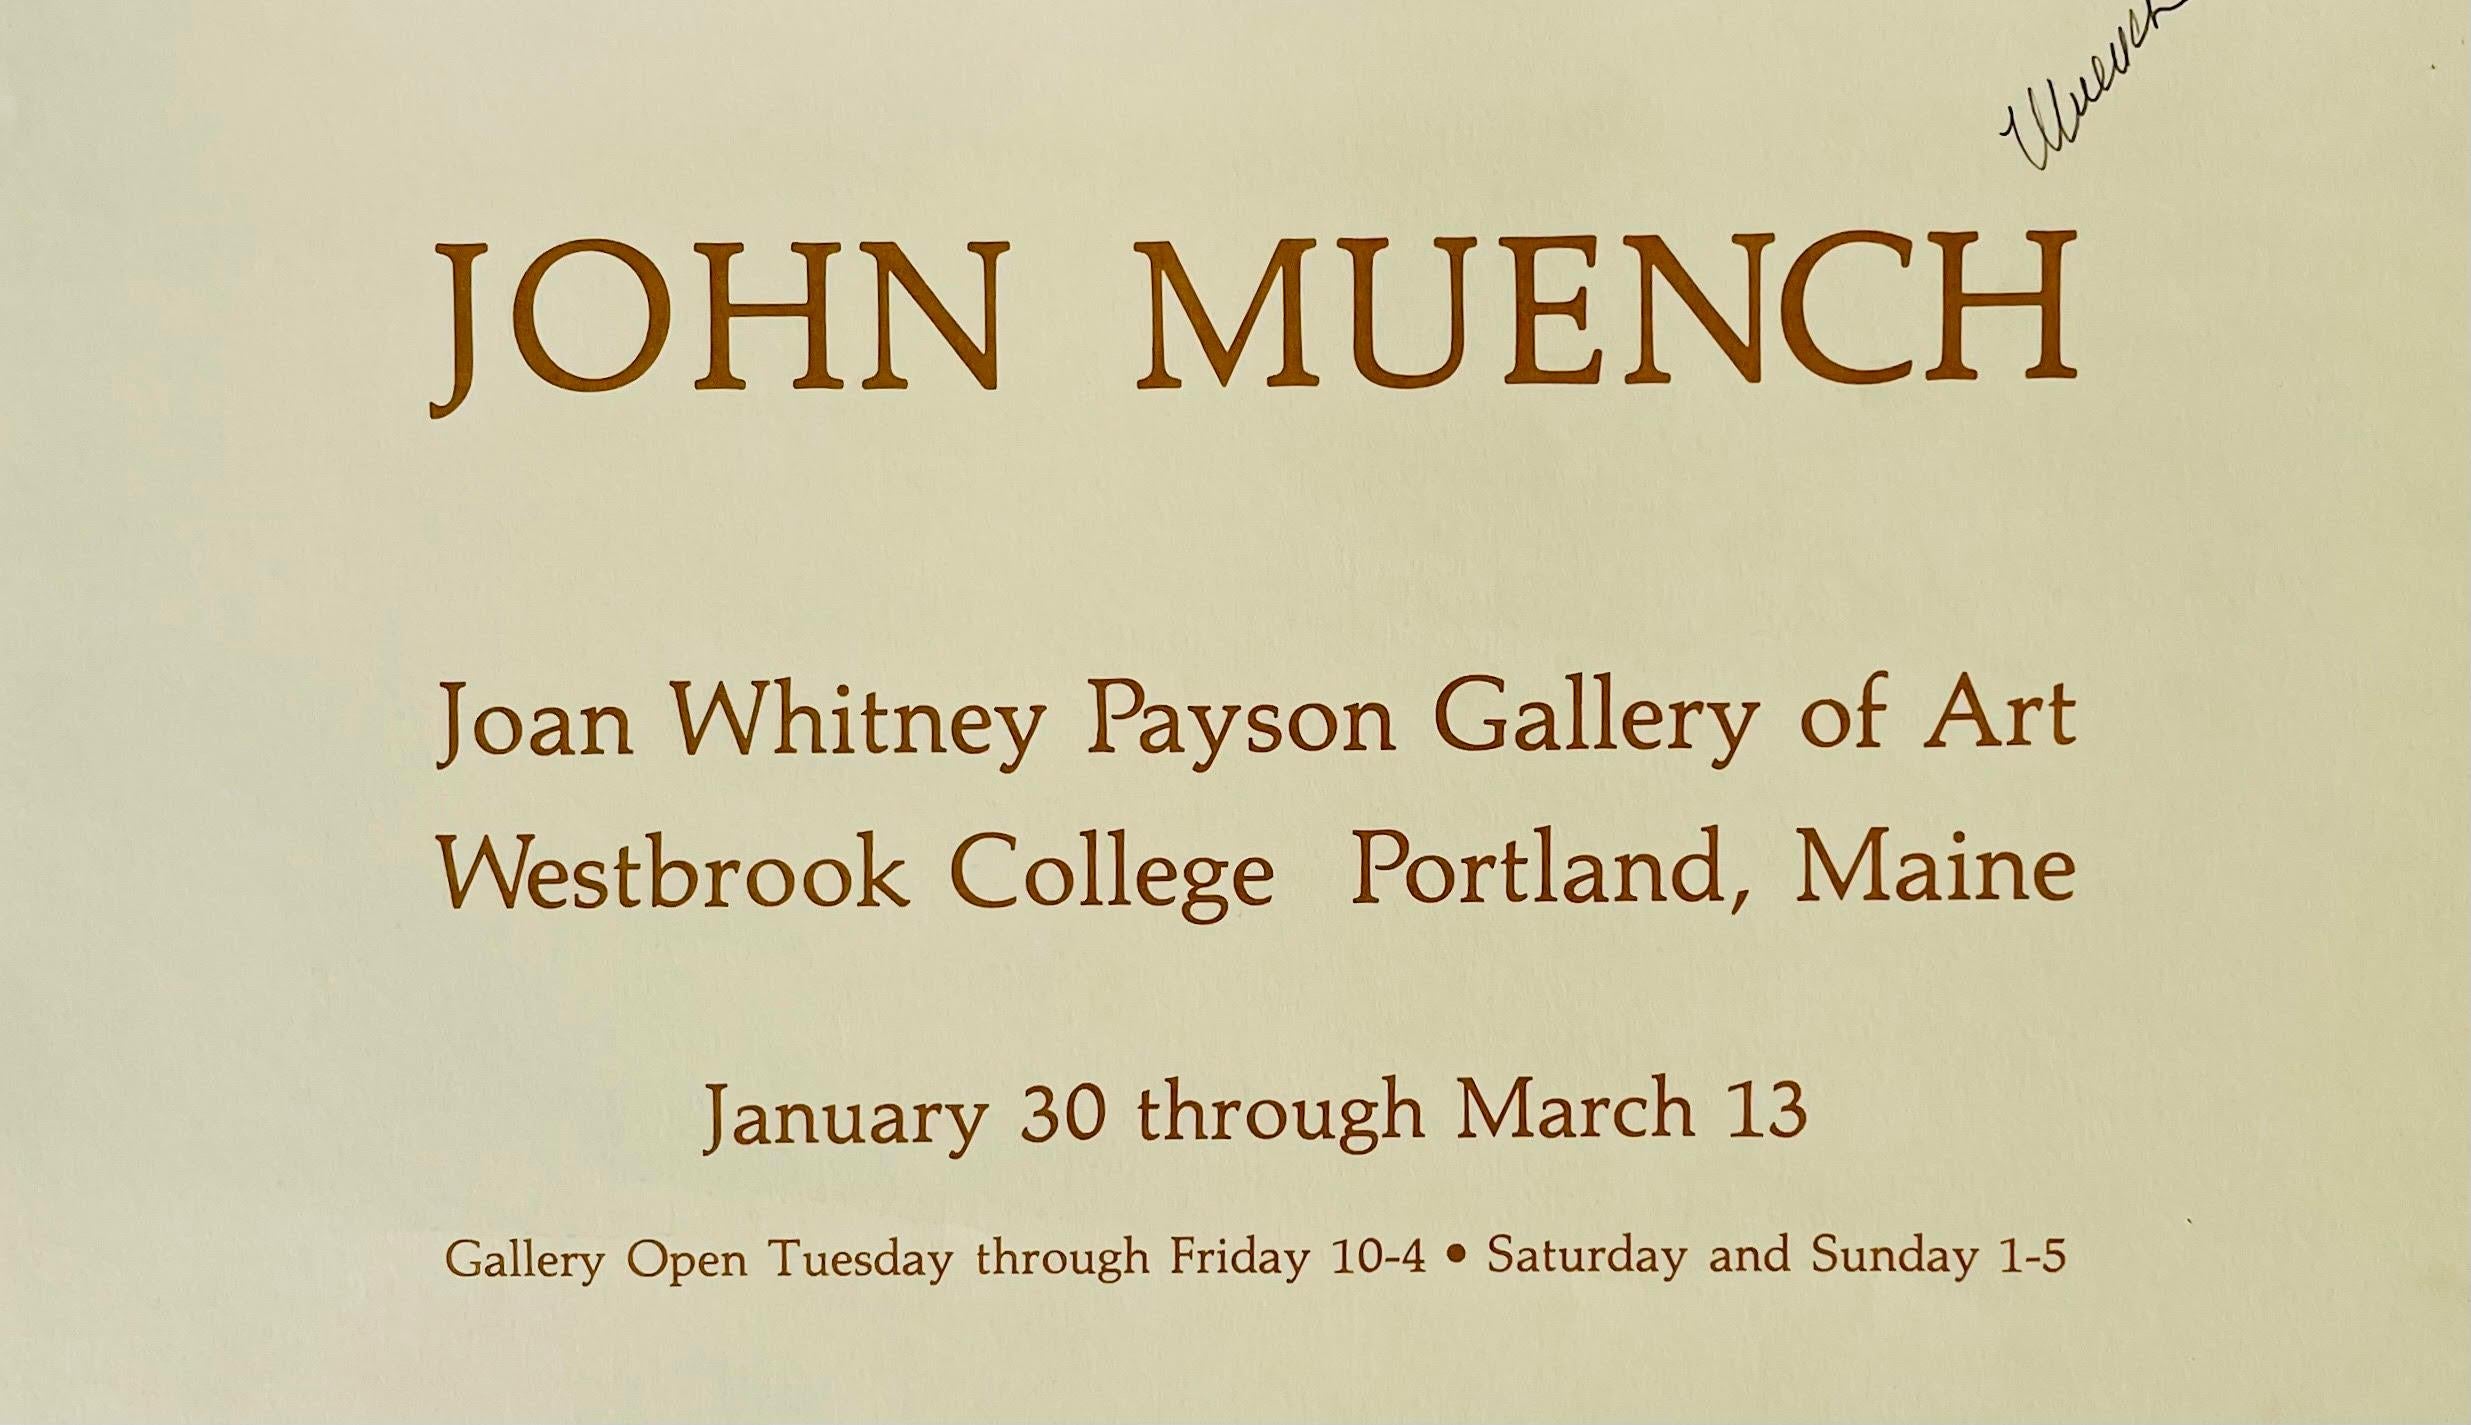 John Muench at Joan Whitney Payson Gallery of Art (Signed by John Muench), ca. 1982
Offset lithograph poster (Hand signed by John Muench)
Hand-signed by artist, Pencil signed by John Muench on the front
25 × 19 inches
Unframed
This poster was